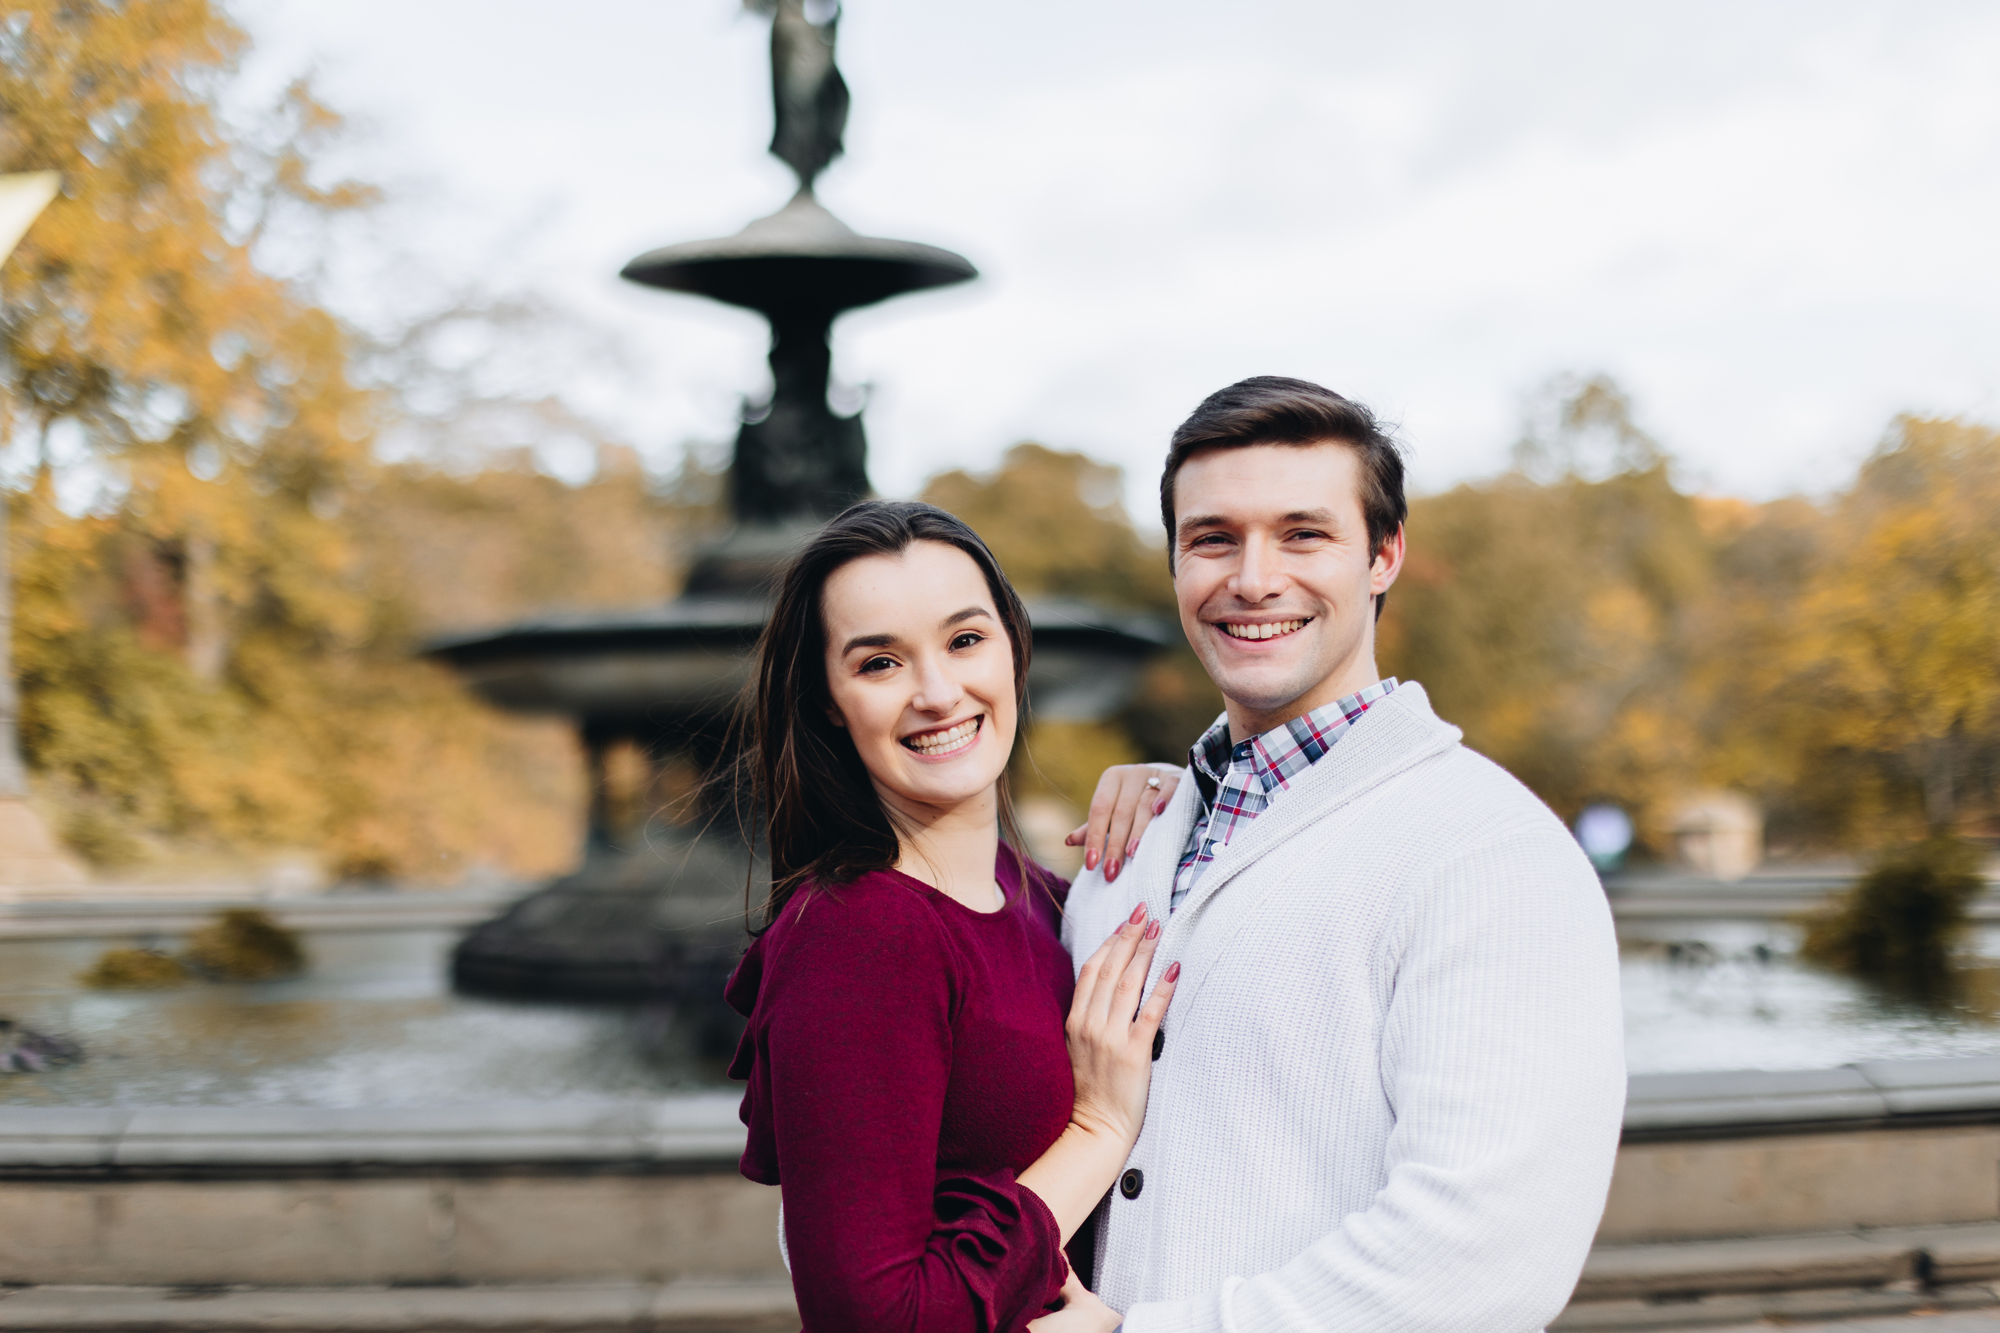 Picture-perfect Fall Engagement Photos in Central Park New York